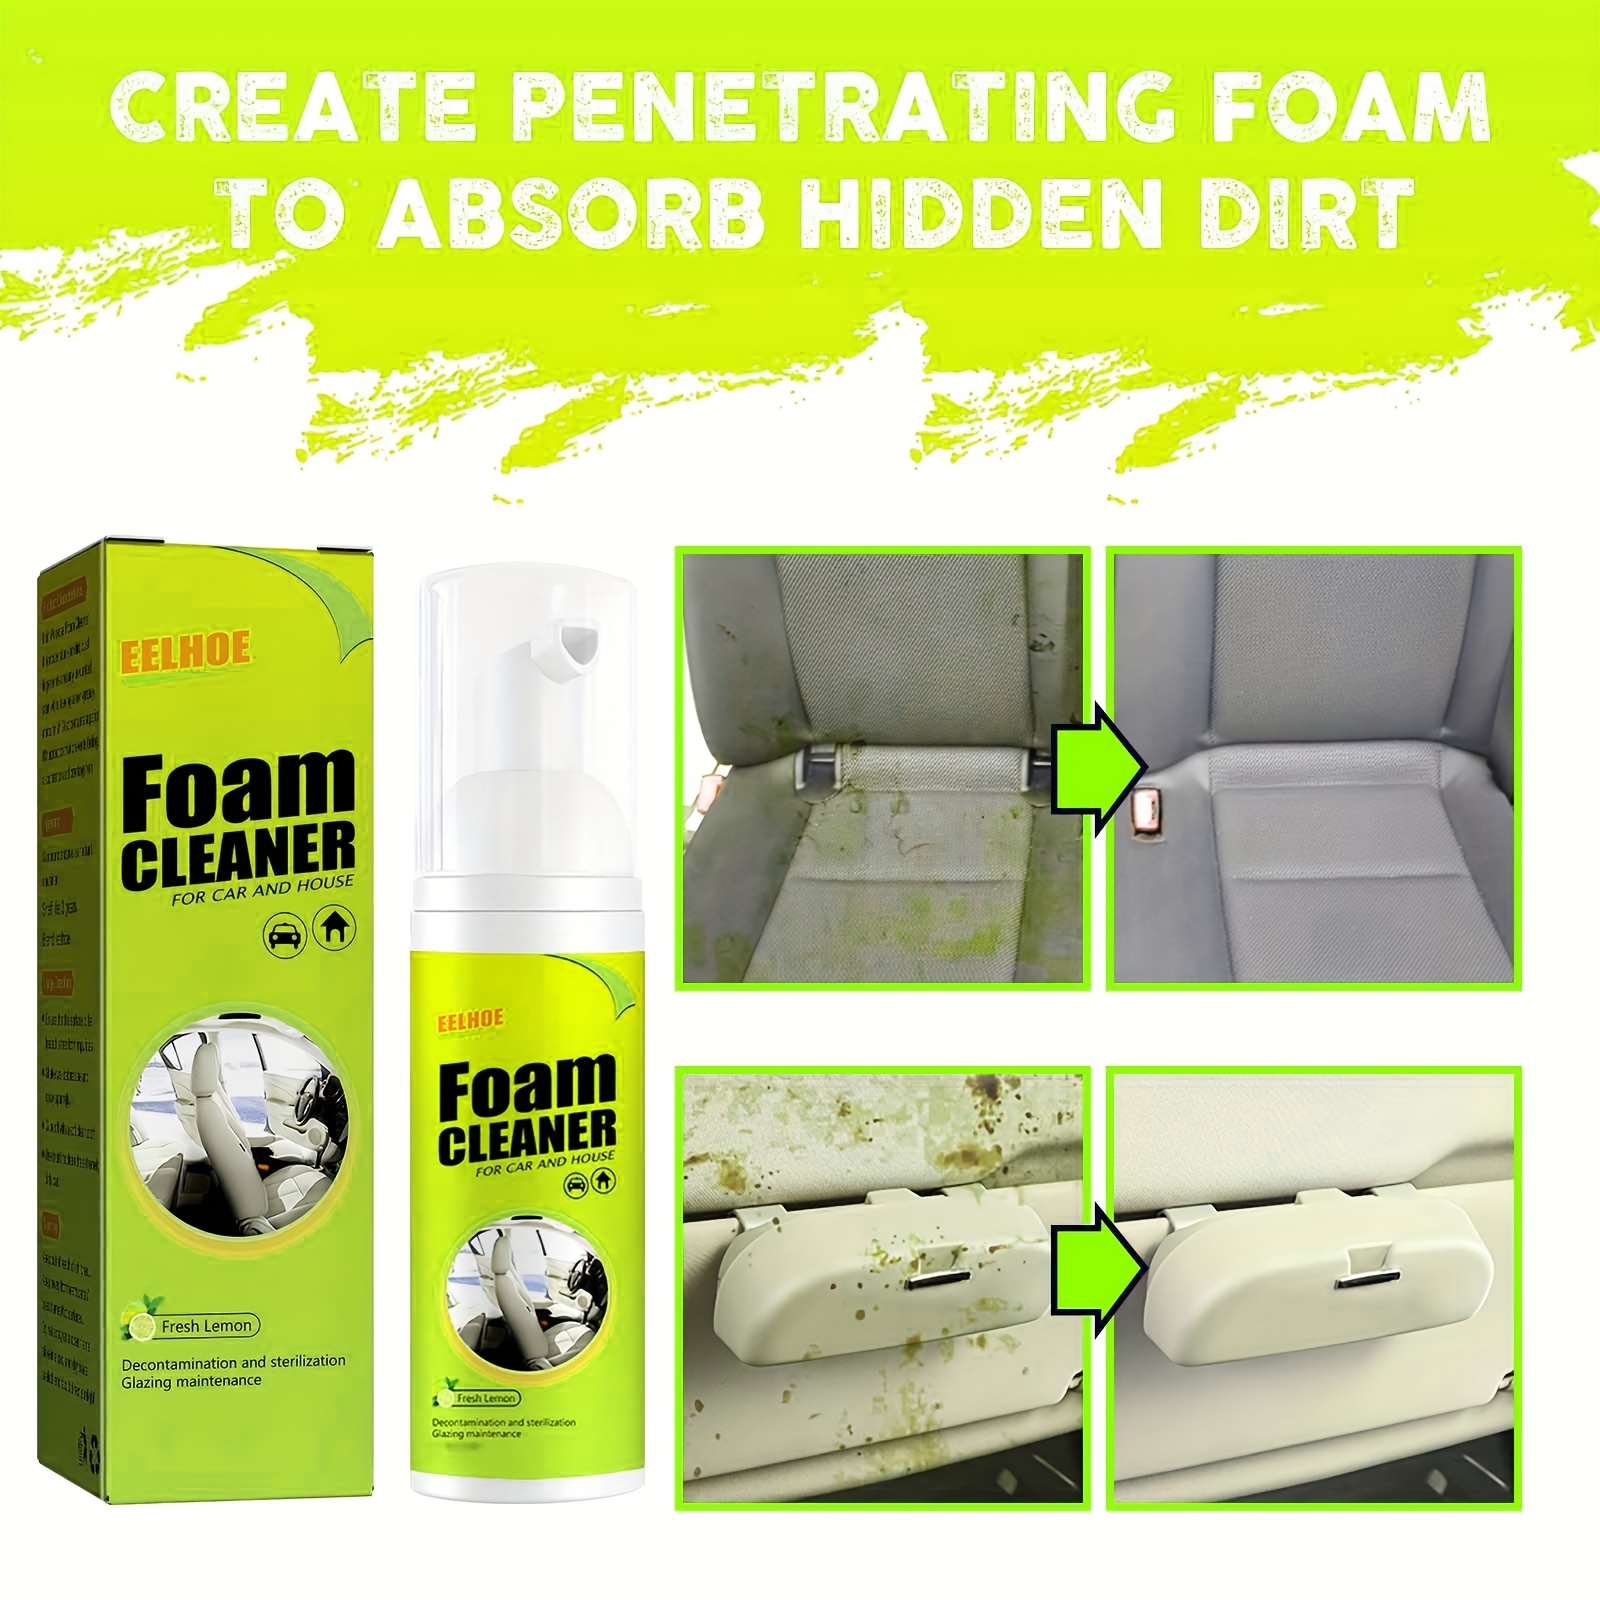 Car Magic Foam Cleaner, Foam Cleaner All Purpose, Foam Cleaner for Car and  House Lemon Flavor, Powerful Stain Removal Kit Foam Cleaner for Car